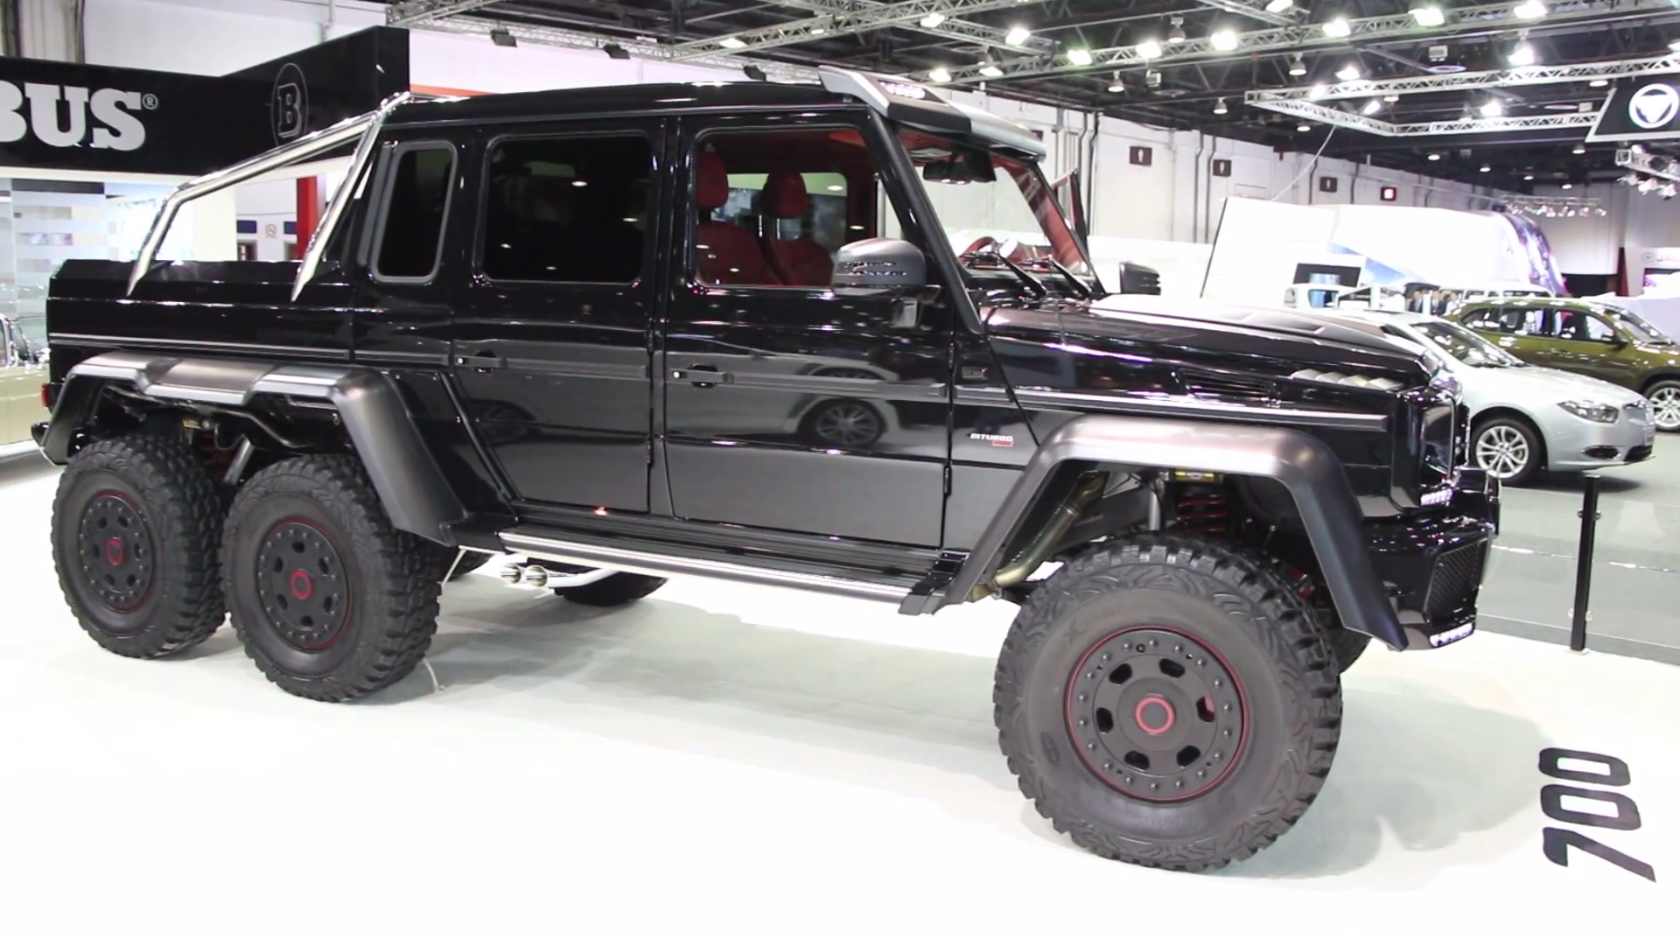 Brabus G 63 Amg 6x6 Steals The Show From The Original Car Autoevolution